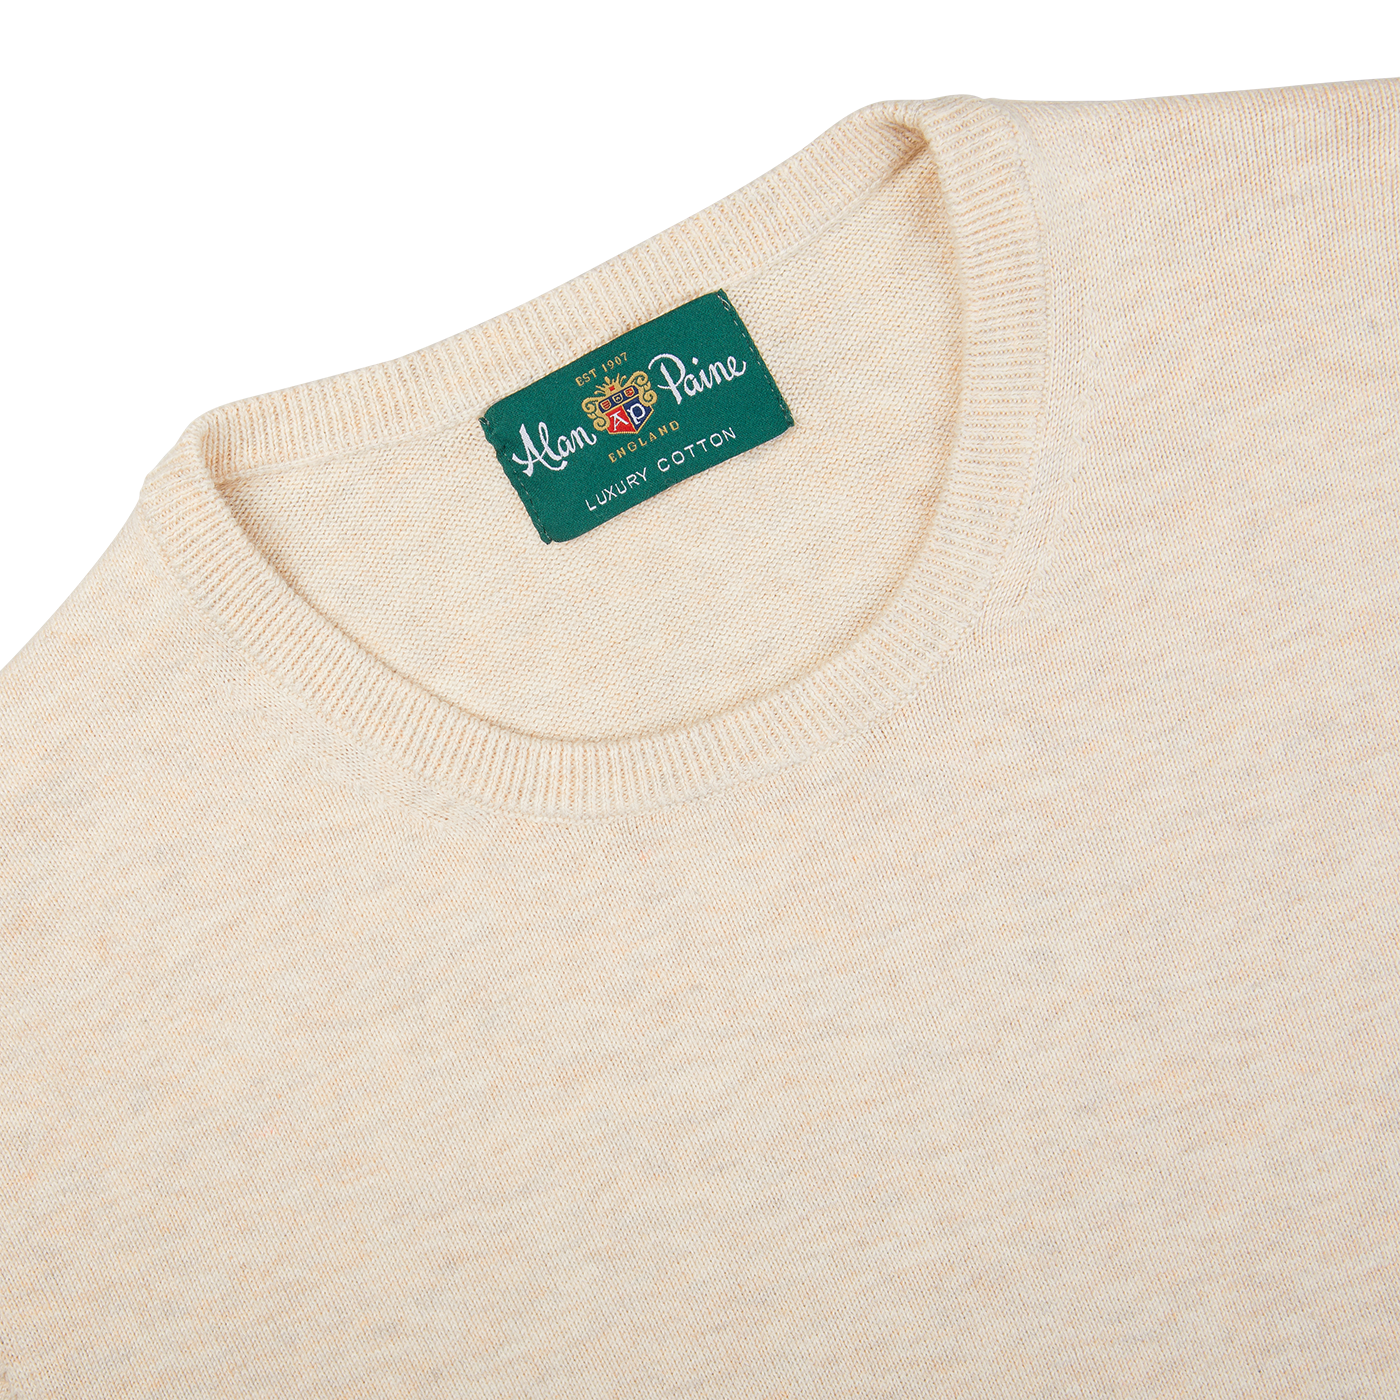 A Light Beige Alan Paine luxury cotton crewneck sweater with a green label on it.